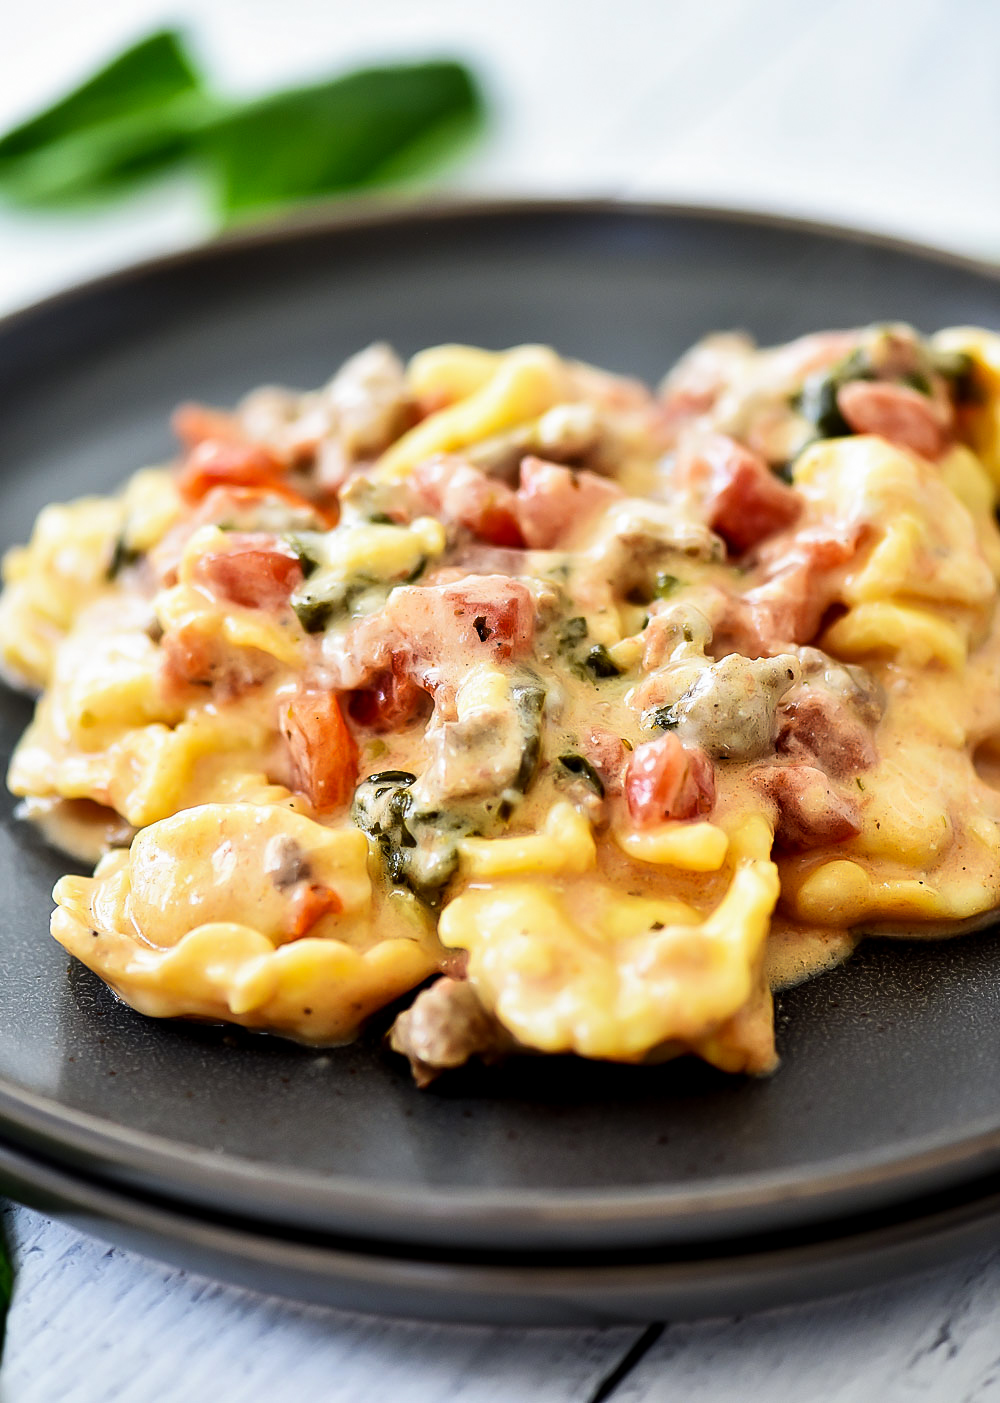 Sausage, cheese tortellini, spinach, diced tomatoes and cheese create this Slow Cooker Sausage and Cheese Tortellini. Life-in-the-Lofthouse.com